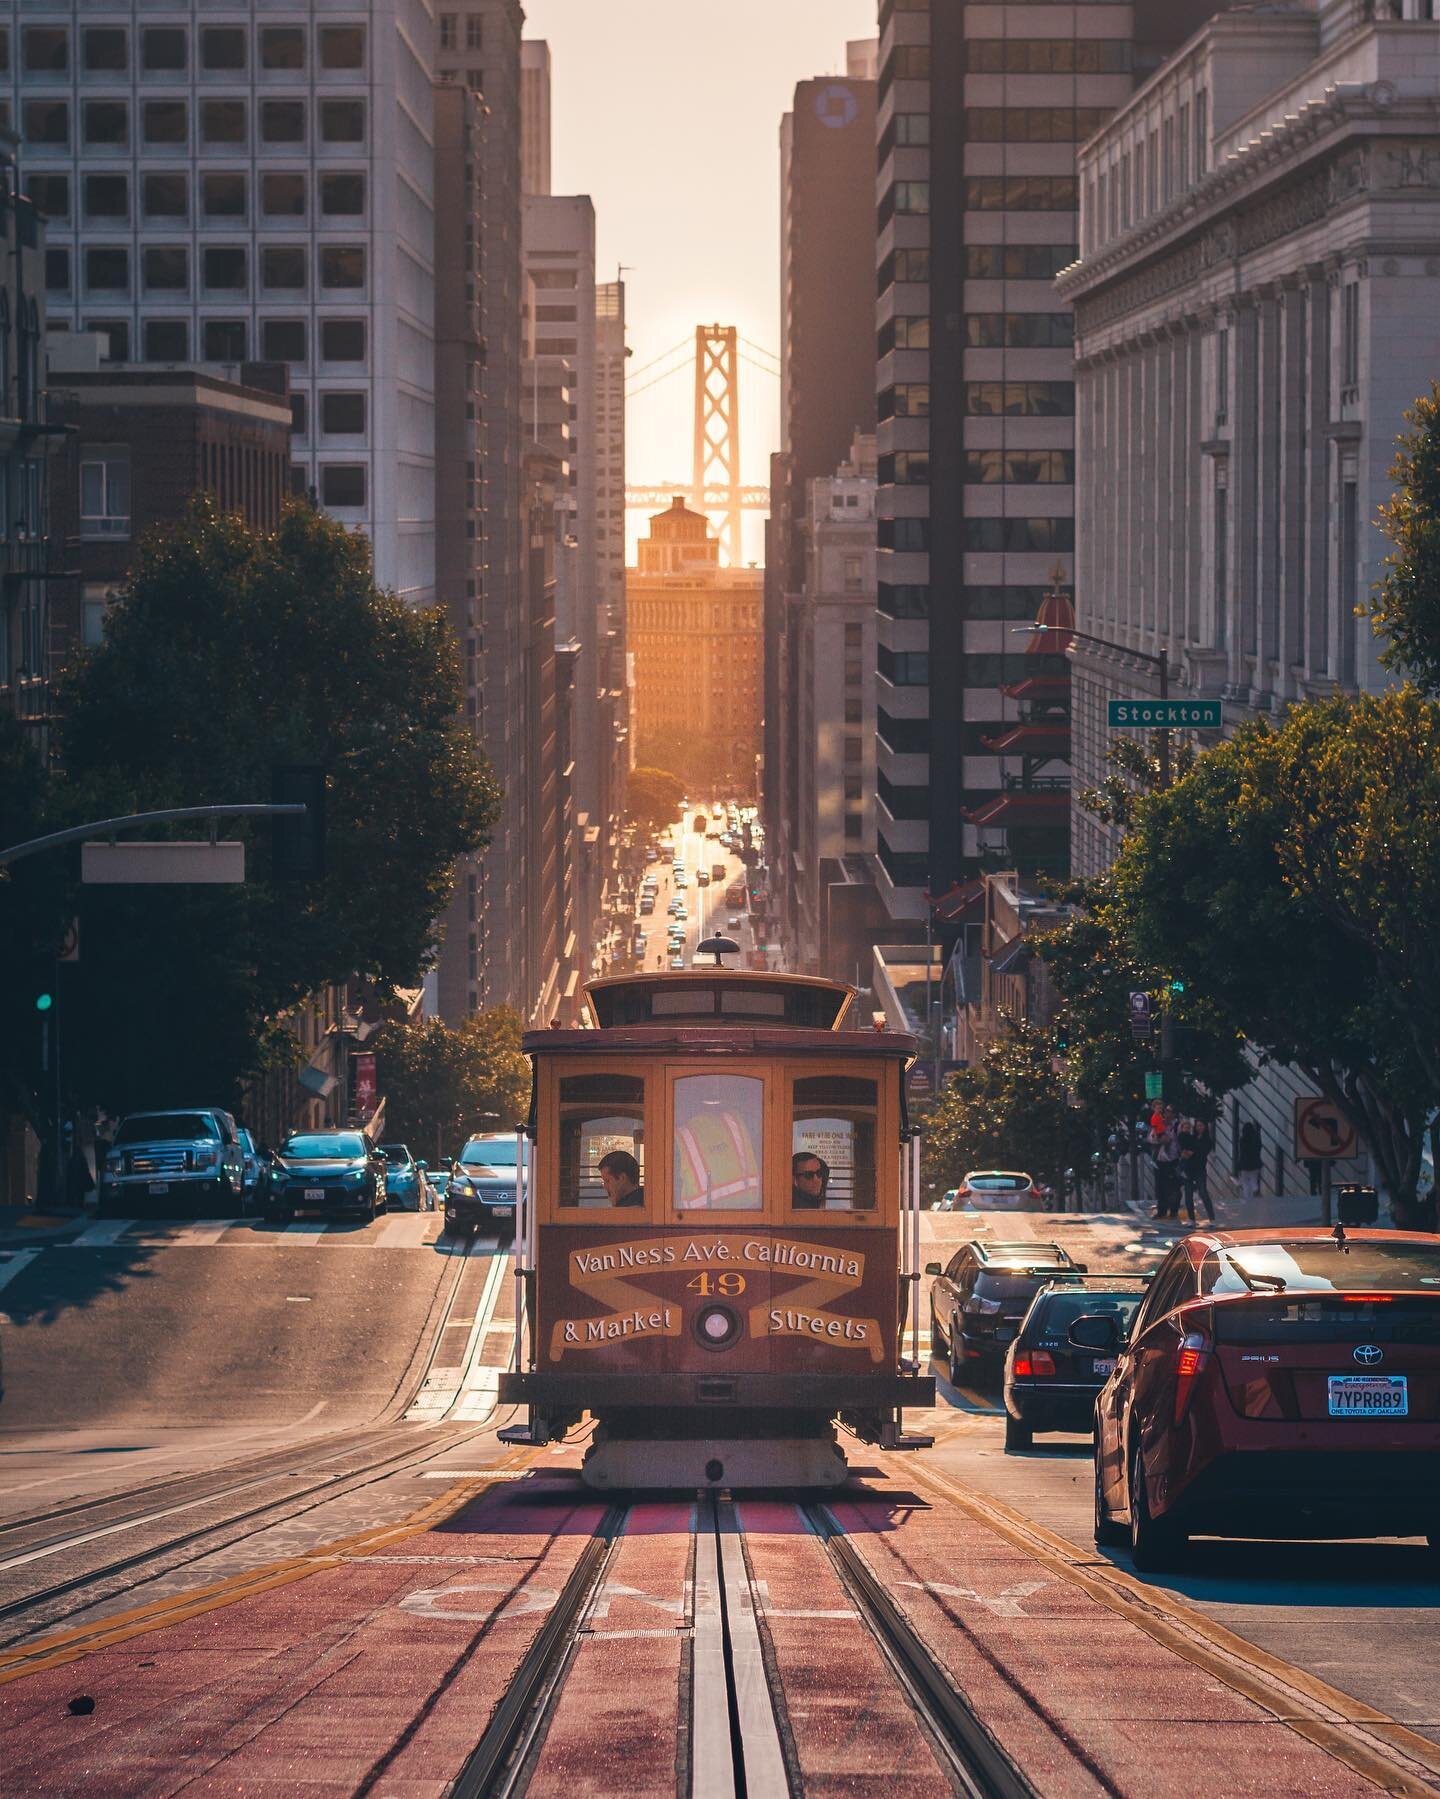 Don&rsquo;t Call It A Comeback

San Francisco is and always will be a world-class city. A pandemic has temporarily changed some of the cities landscape, but with a strong vaccine program, the neighborhoods are starting to thrive and come out of hiber